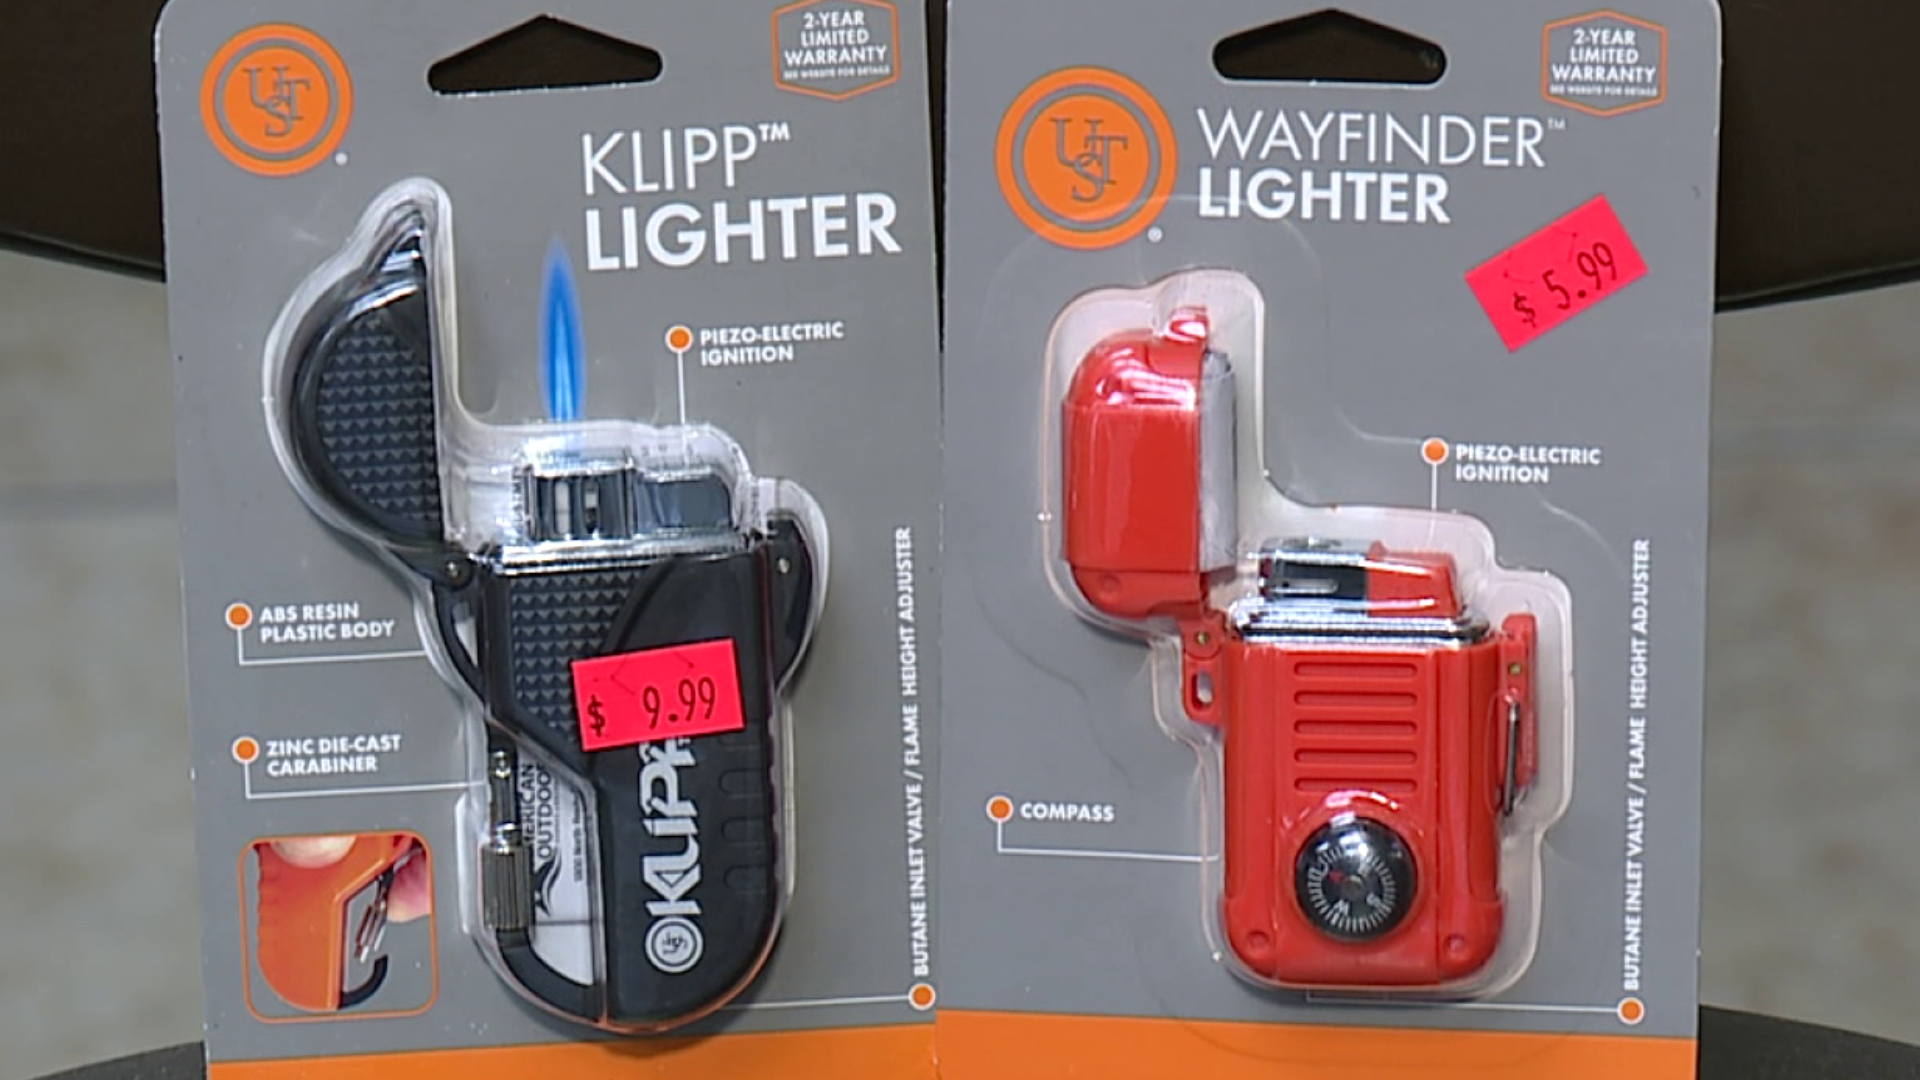 The maker claims these lighters will work even in the harshest outdoor conditions.